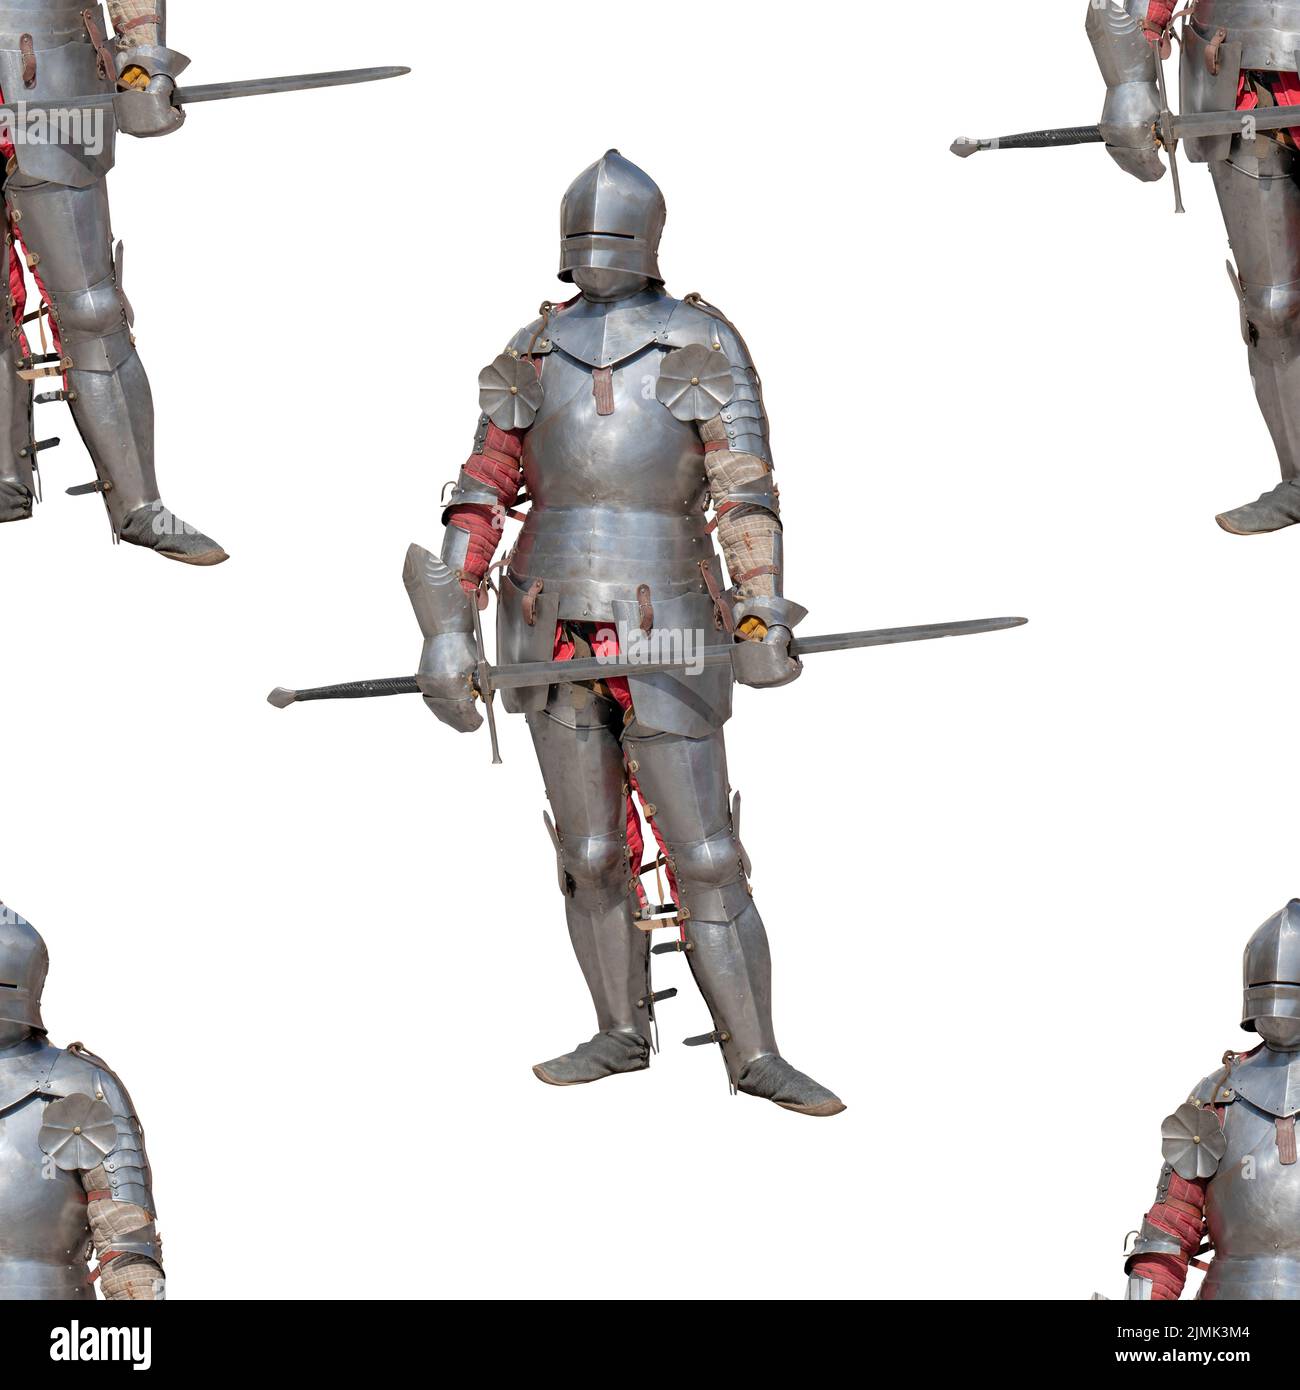 Knight in shiny metal armor on a white background. Seamless pattern. Stock Photo